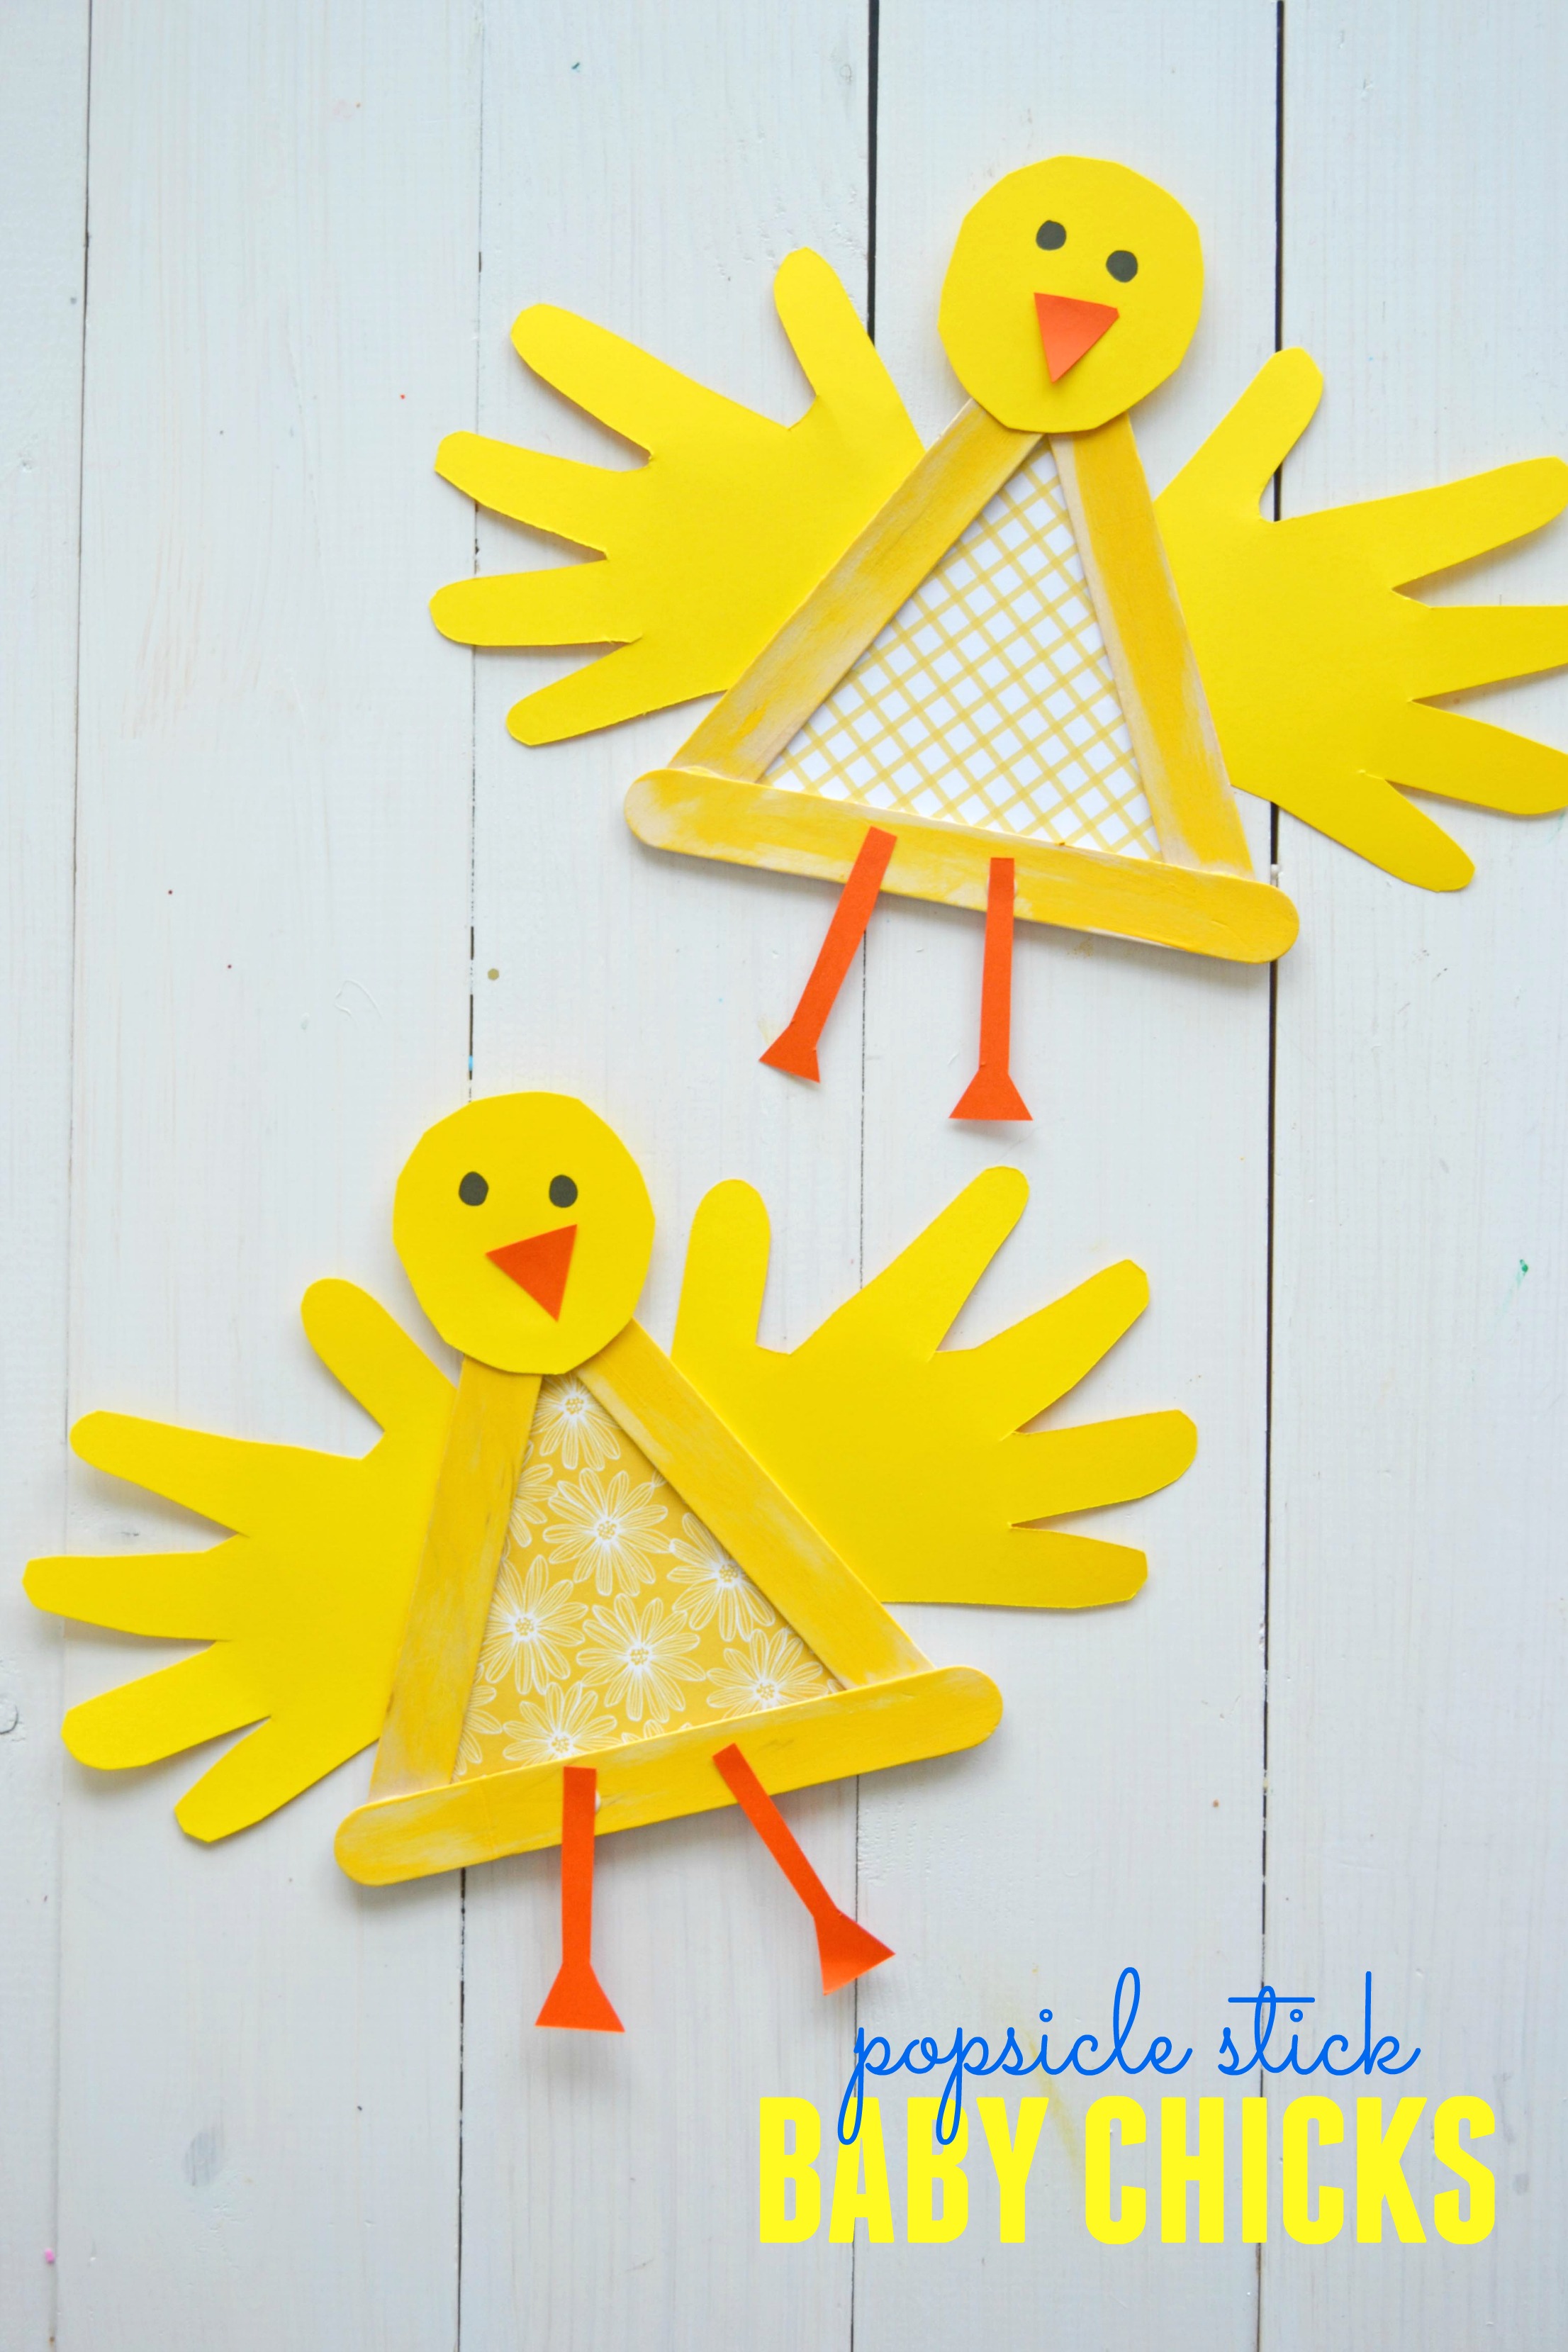 Get Crafty This Spring With Easter Popsicle Stick Crafts